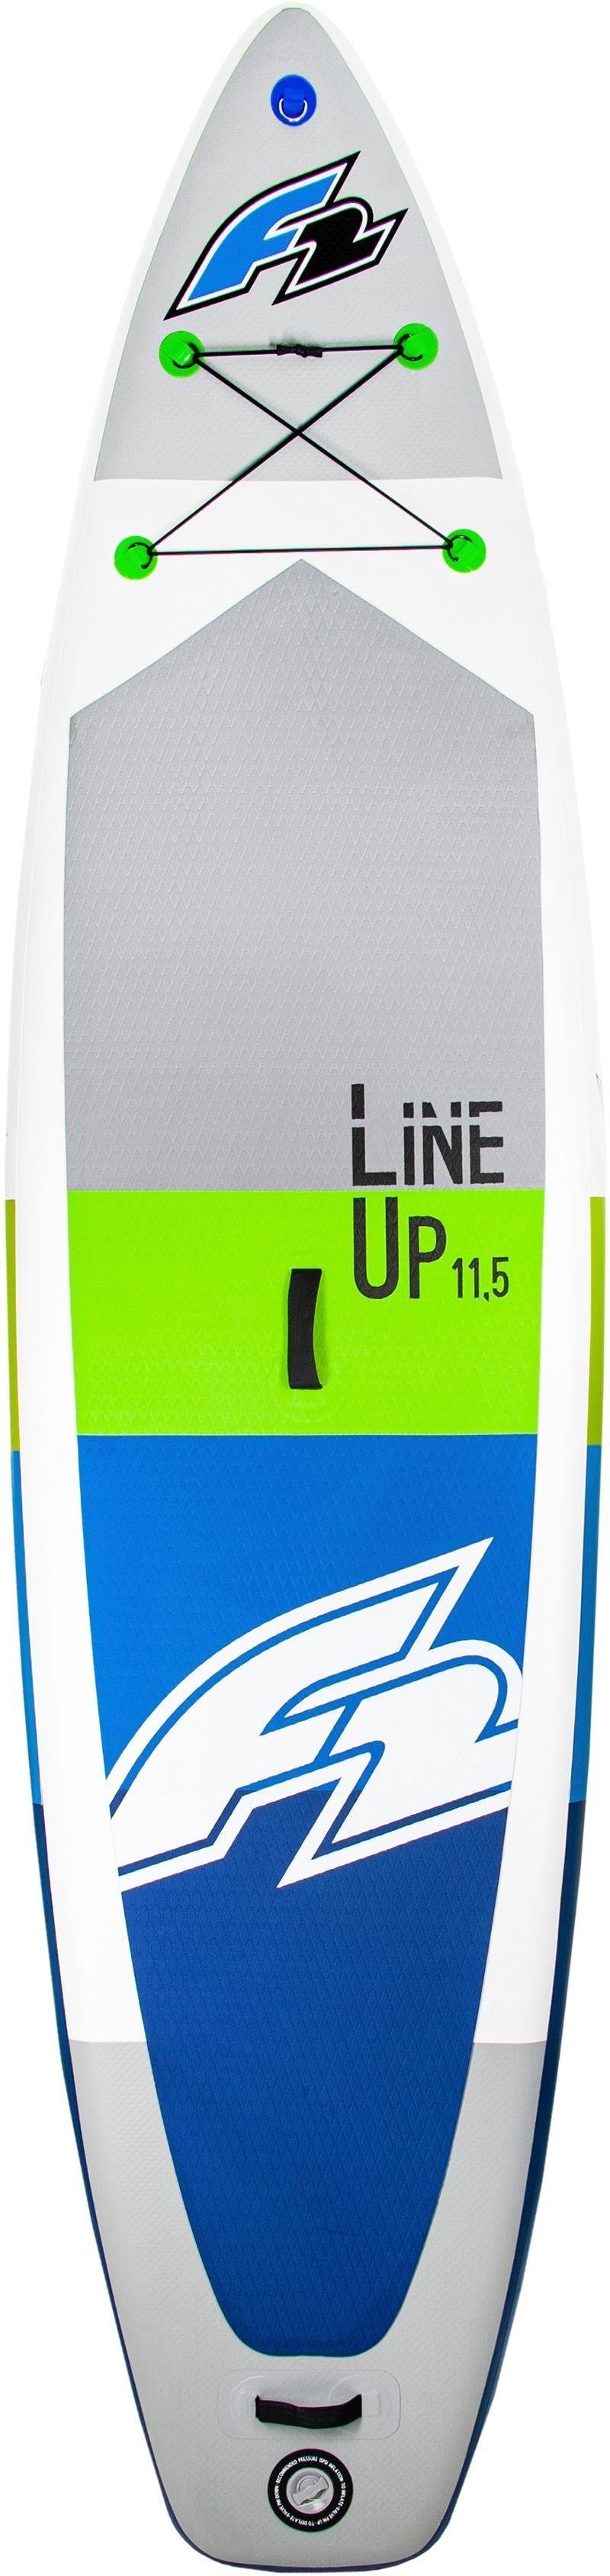 SMO Line F2 tlg) Up 3 SUP-Board blue, (Set, Inflatable F2